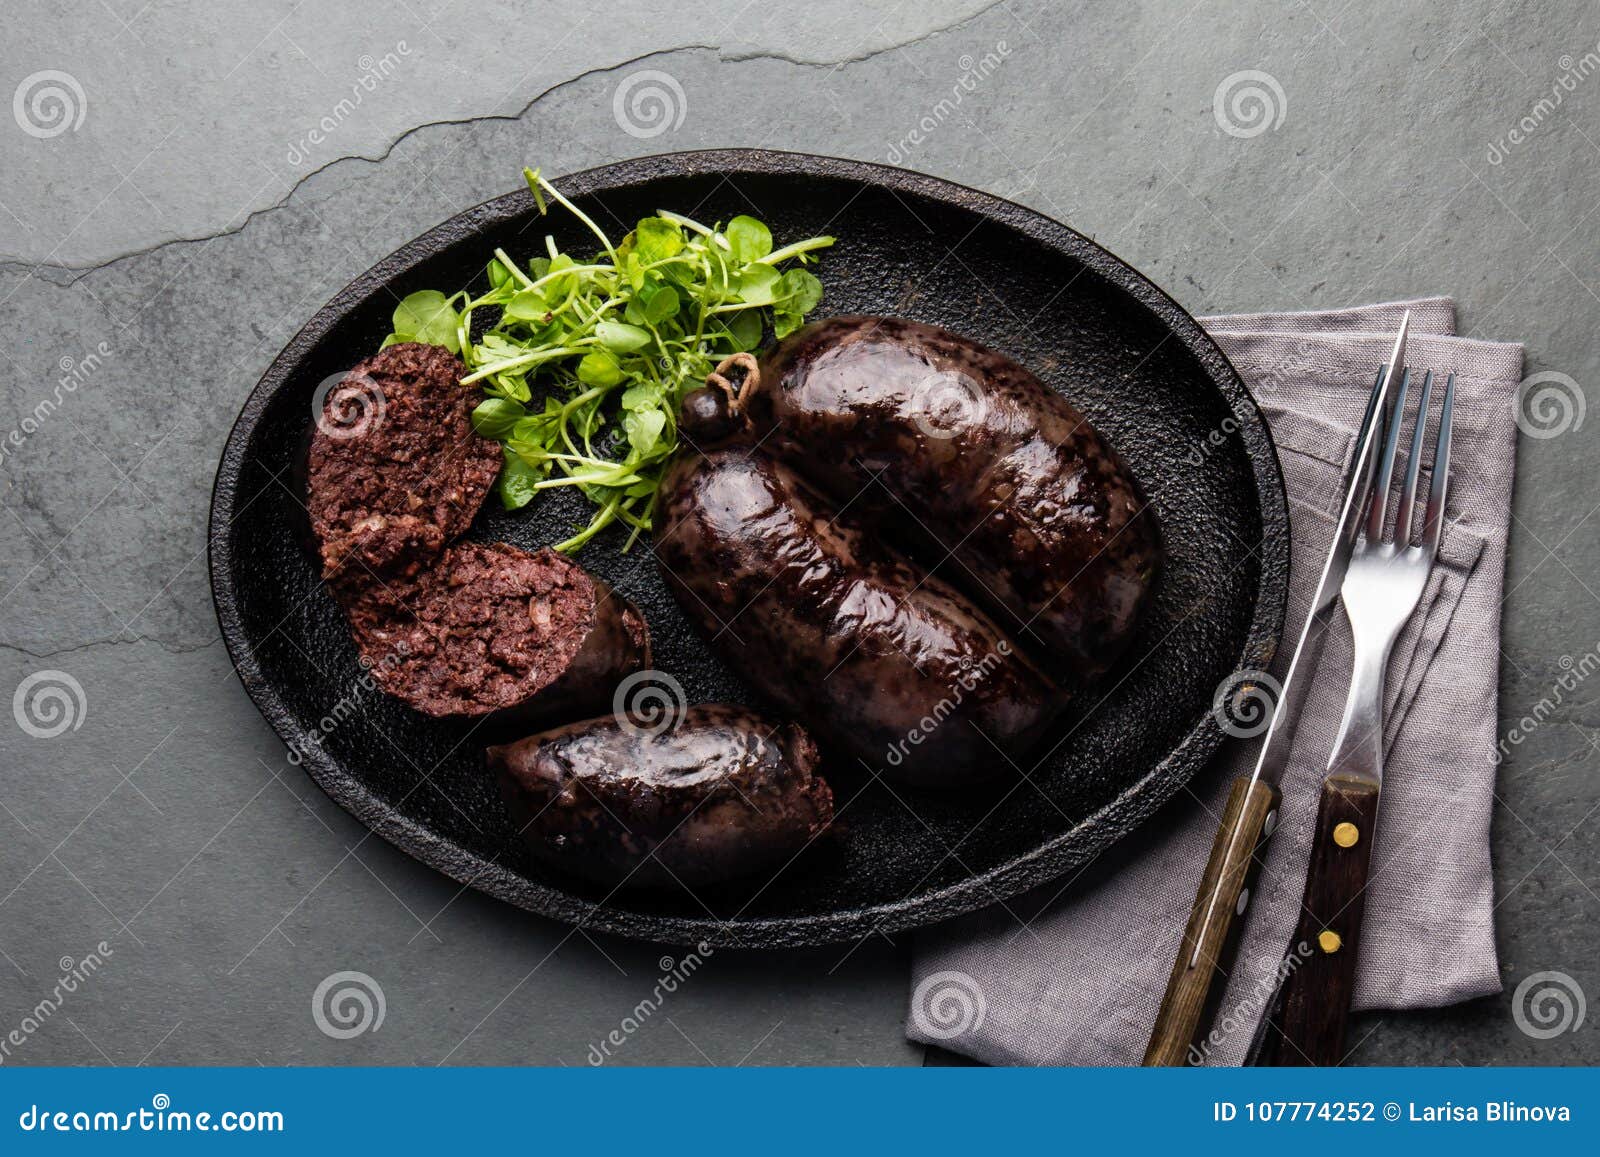 bloody sausages - chilean preta on iron plate, top view, grey slate background